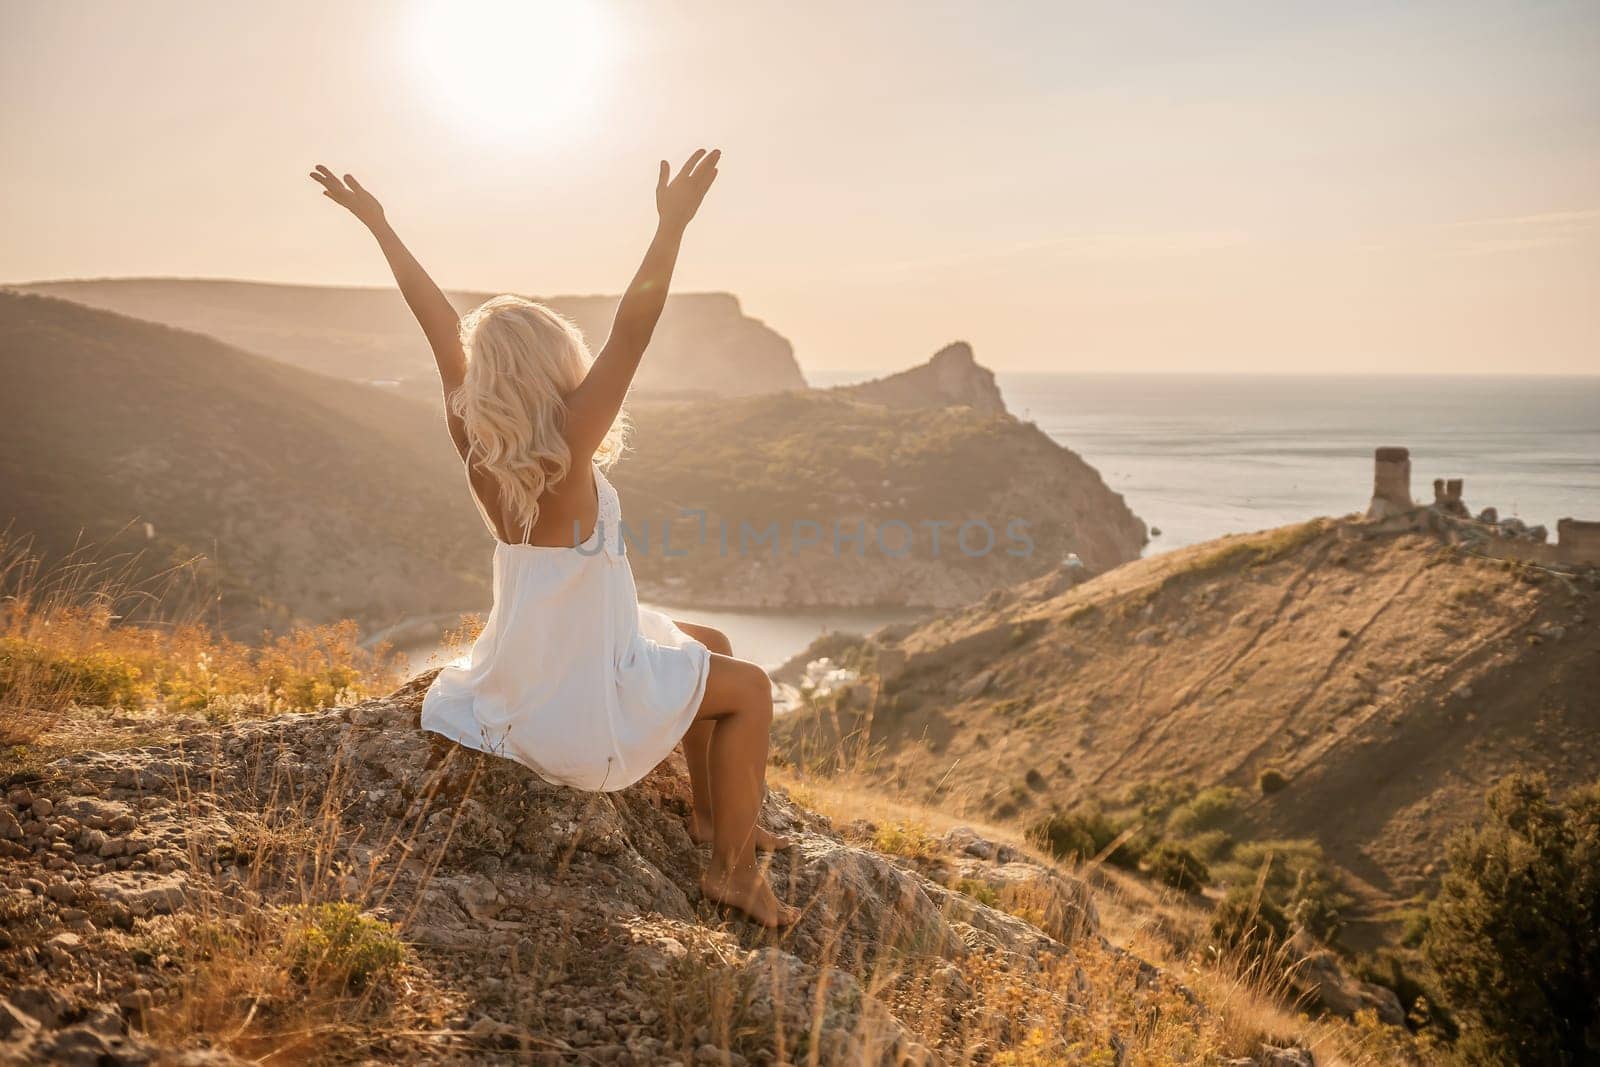 Happy woman is sitting on a hillside, wearing a white dress. She is surrounded by a beautiful landscape, with a body of sea in the background. Concept of peace and happiness